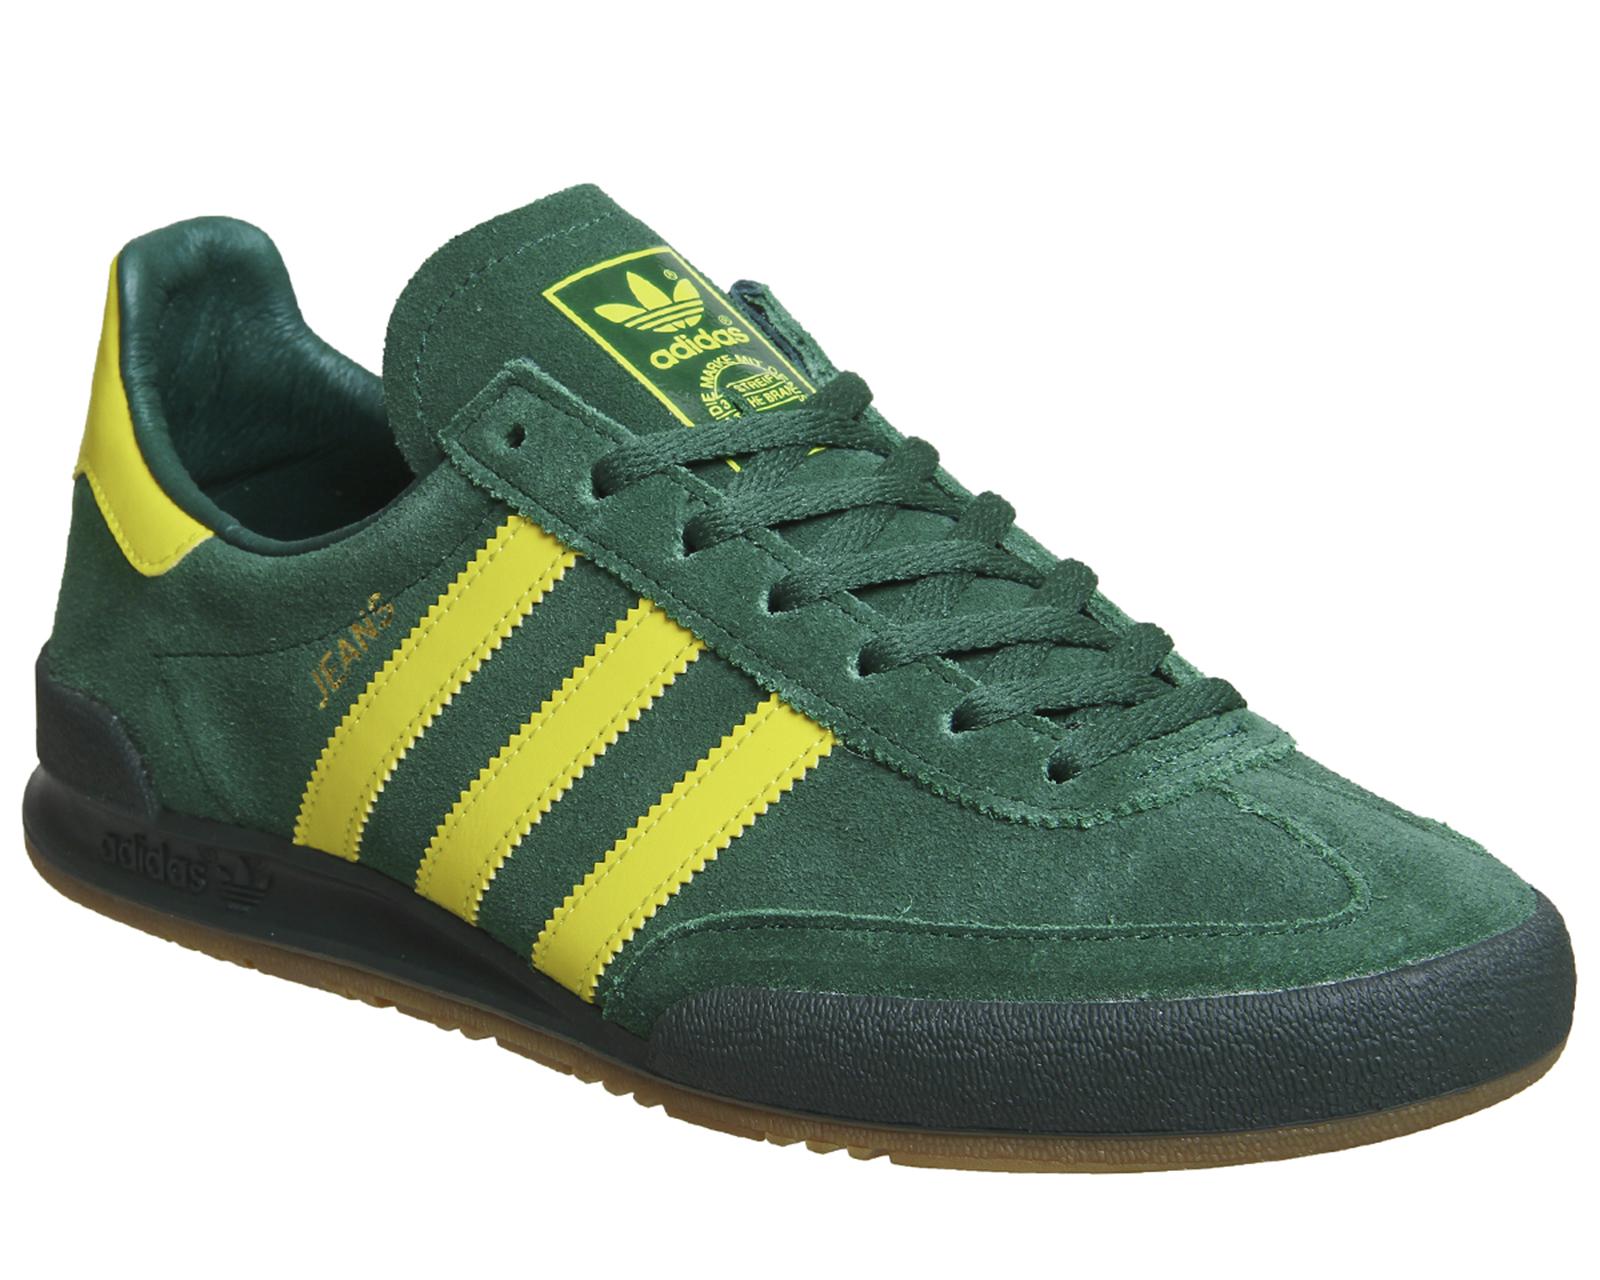 adidas Denim Jeans Trainers in Green for Men - Lyst